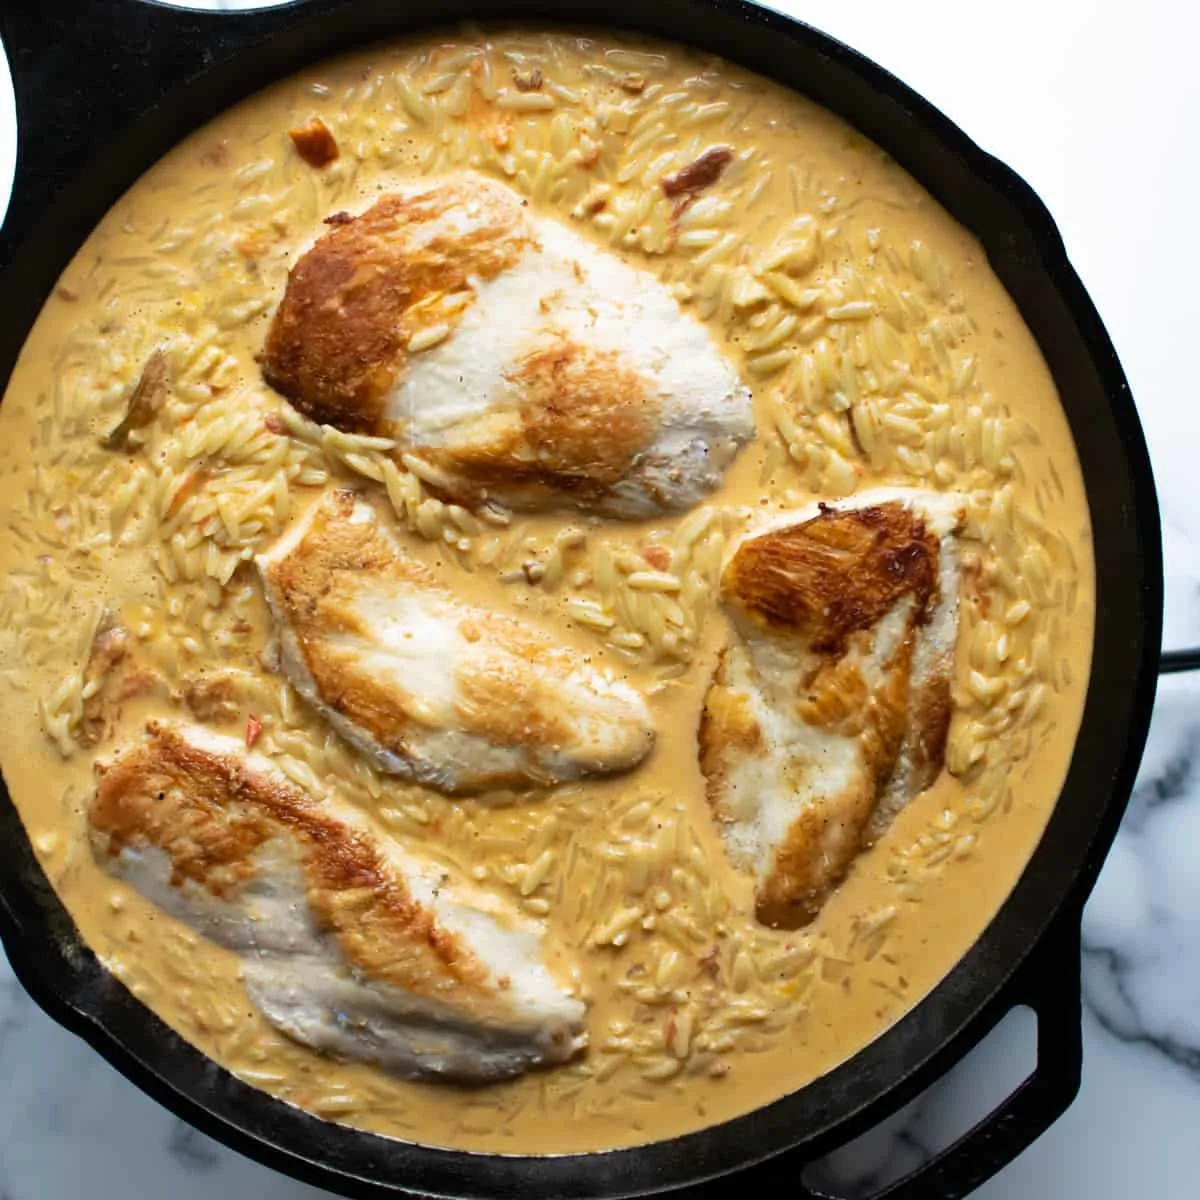 Chicken breasts and orzo cooking in a light sauce in a skillet.